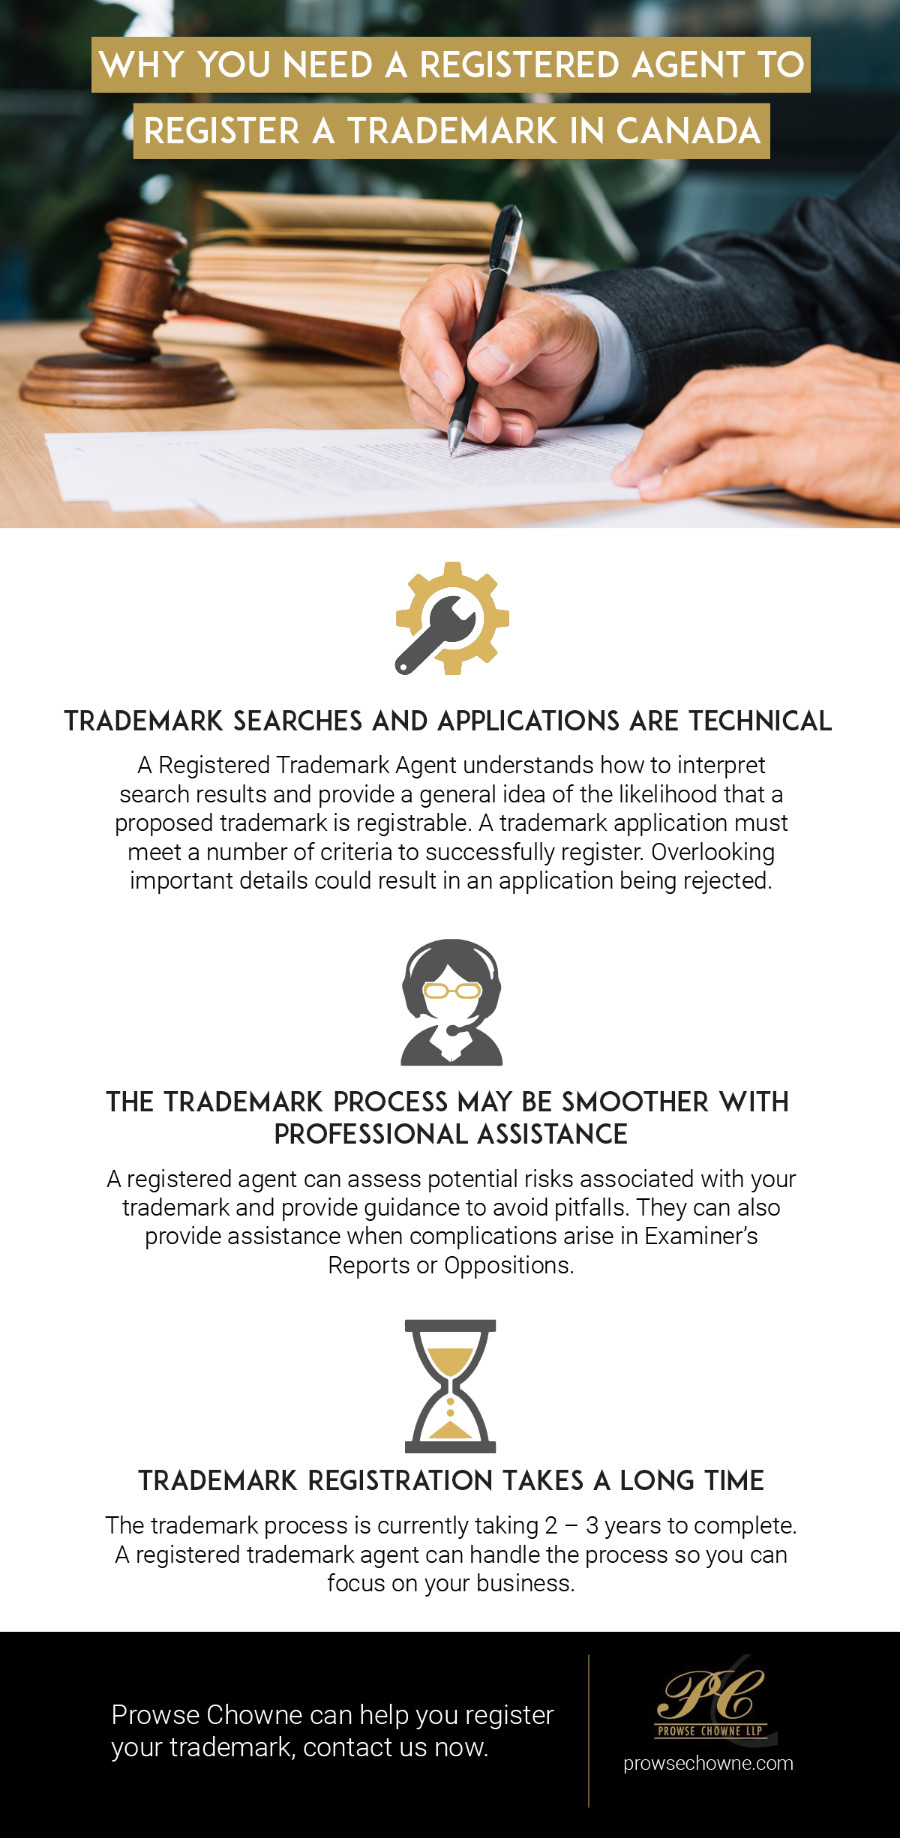 Need A Registered Agent To Register A Trademark in Canada